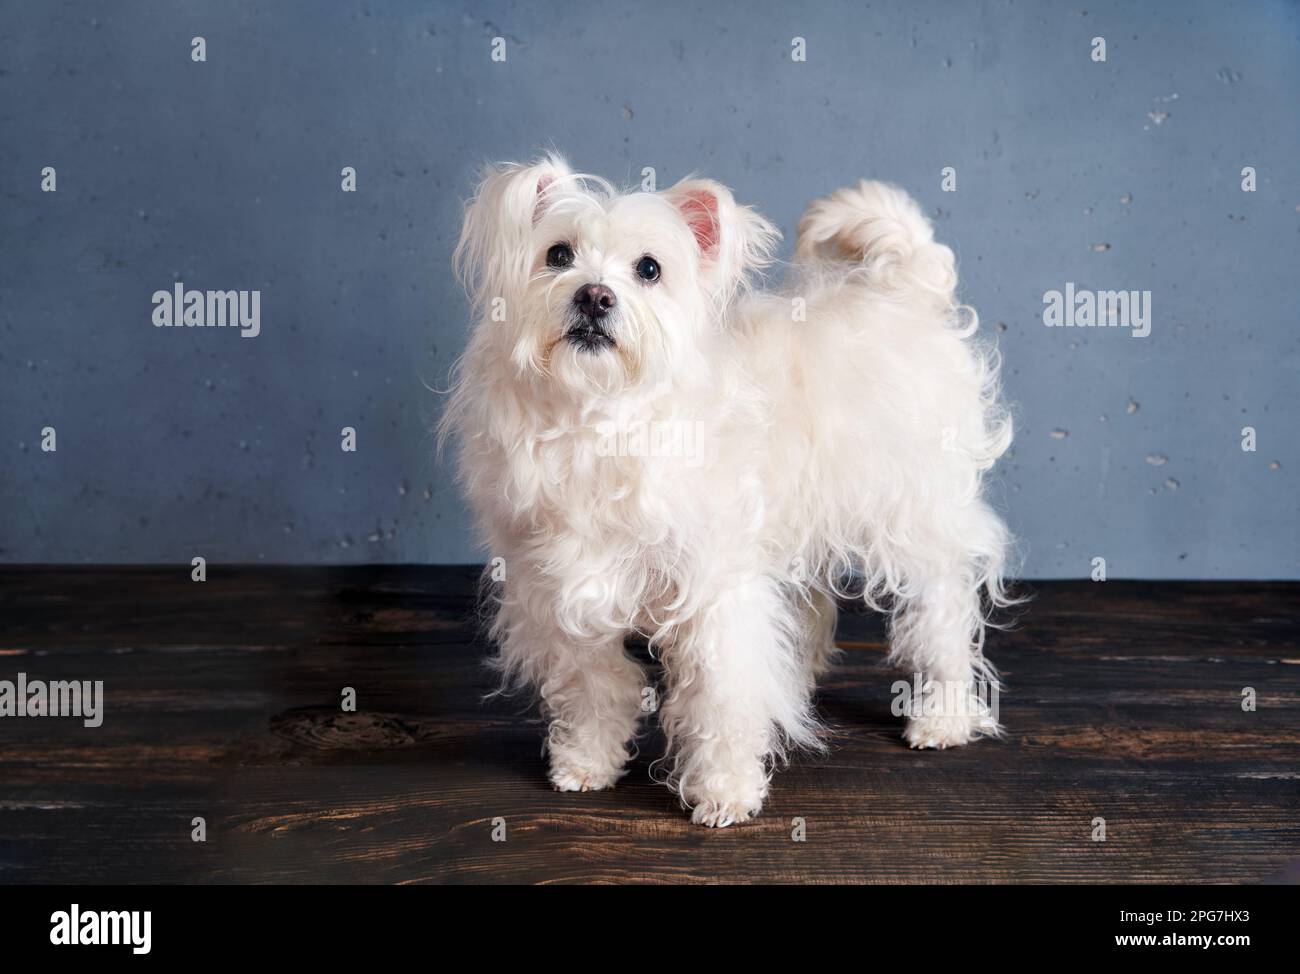 Adorable playful white dog breed posing in studio.  Animals, pet care concept Stock Photo